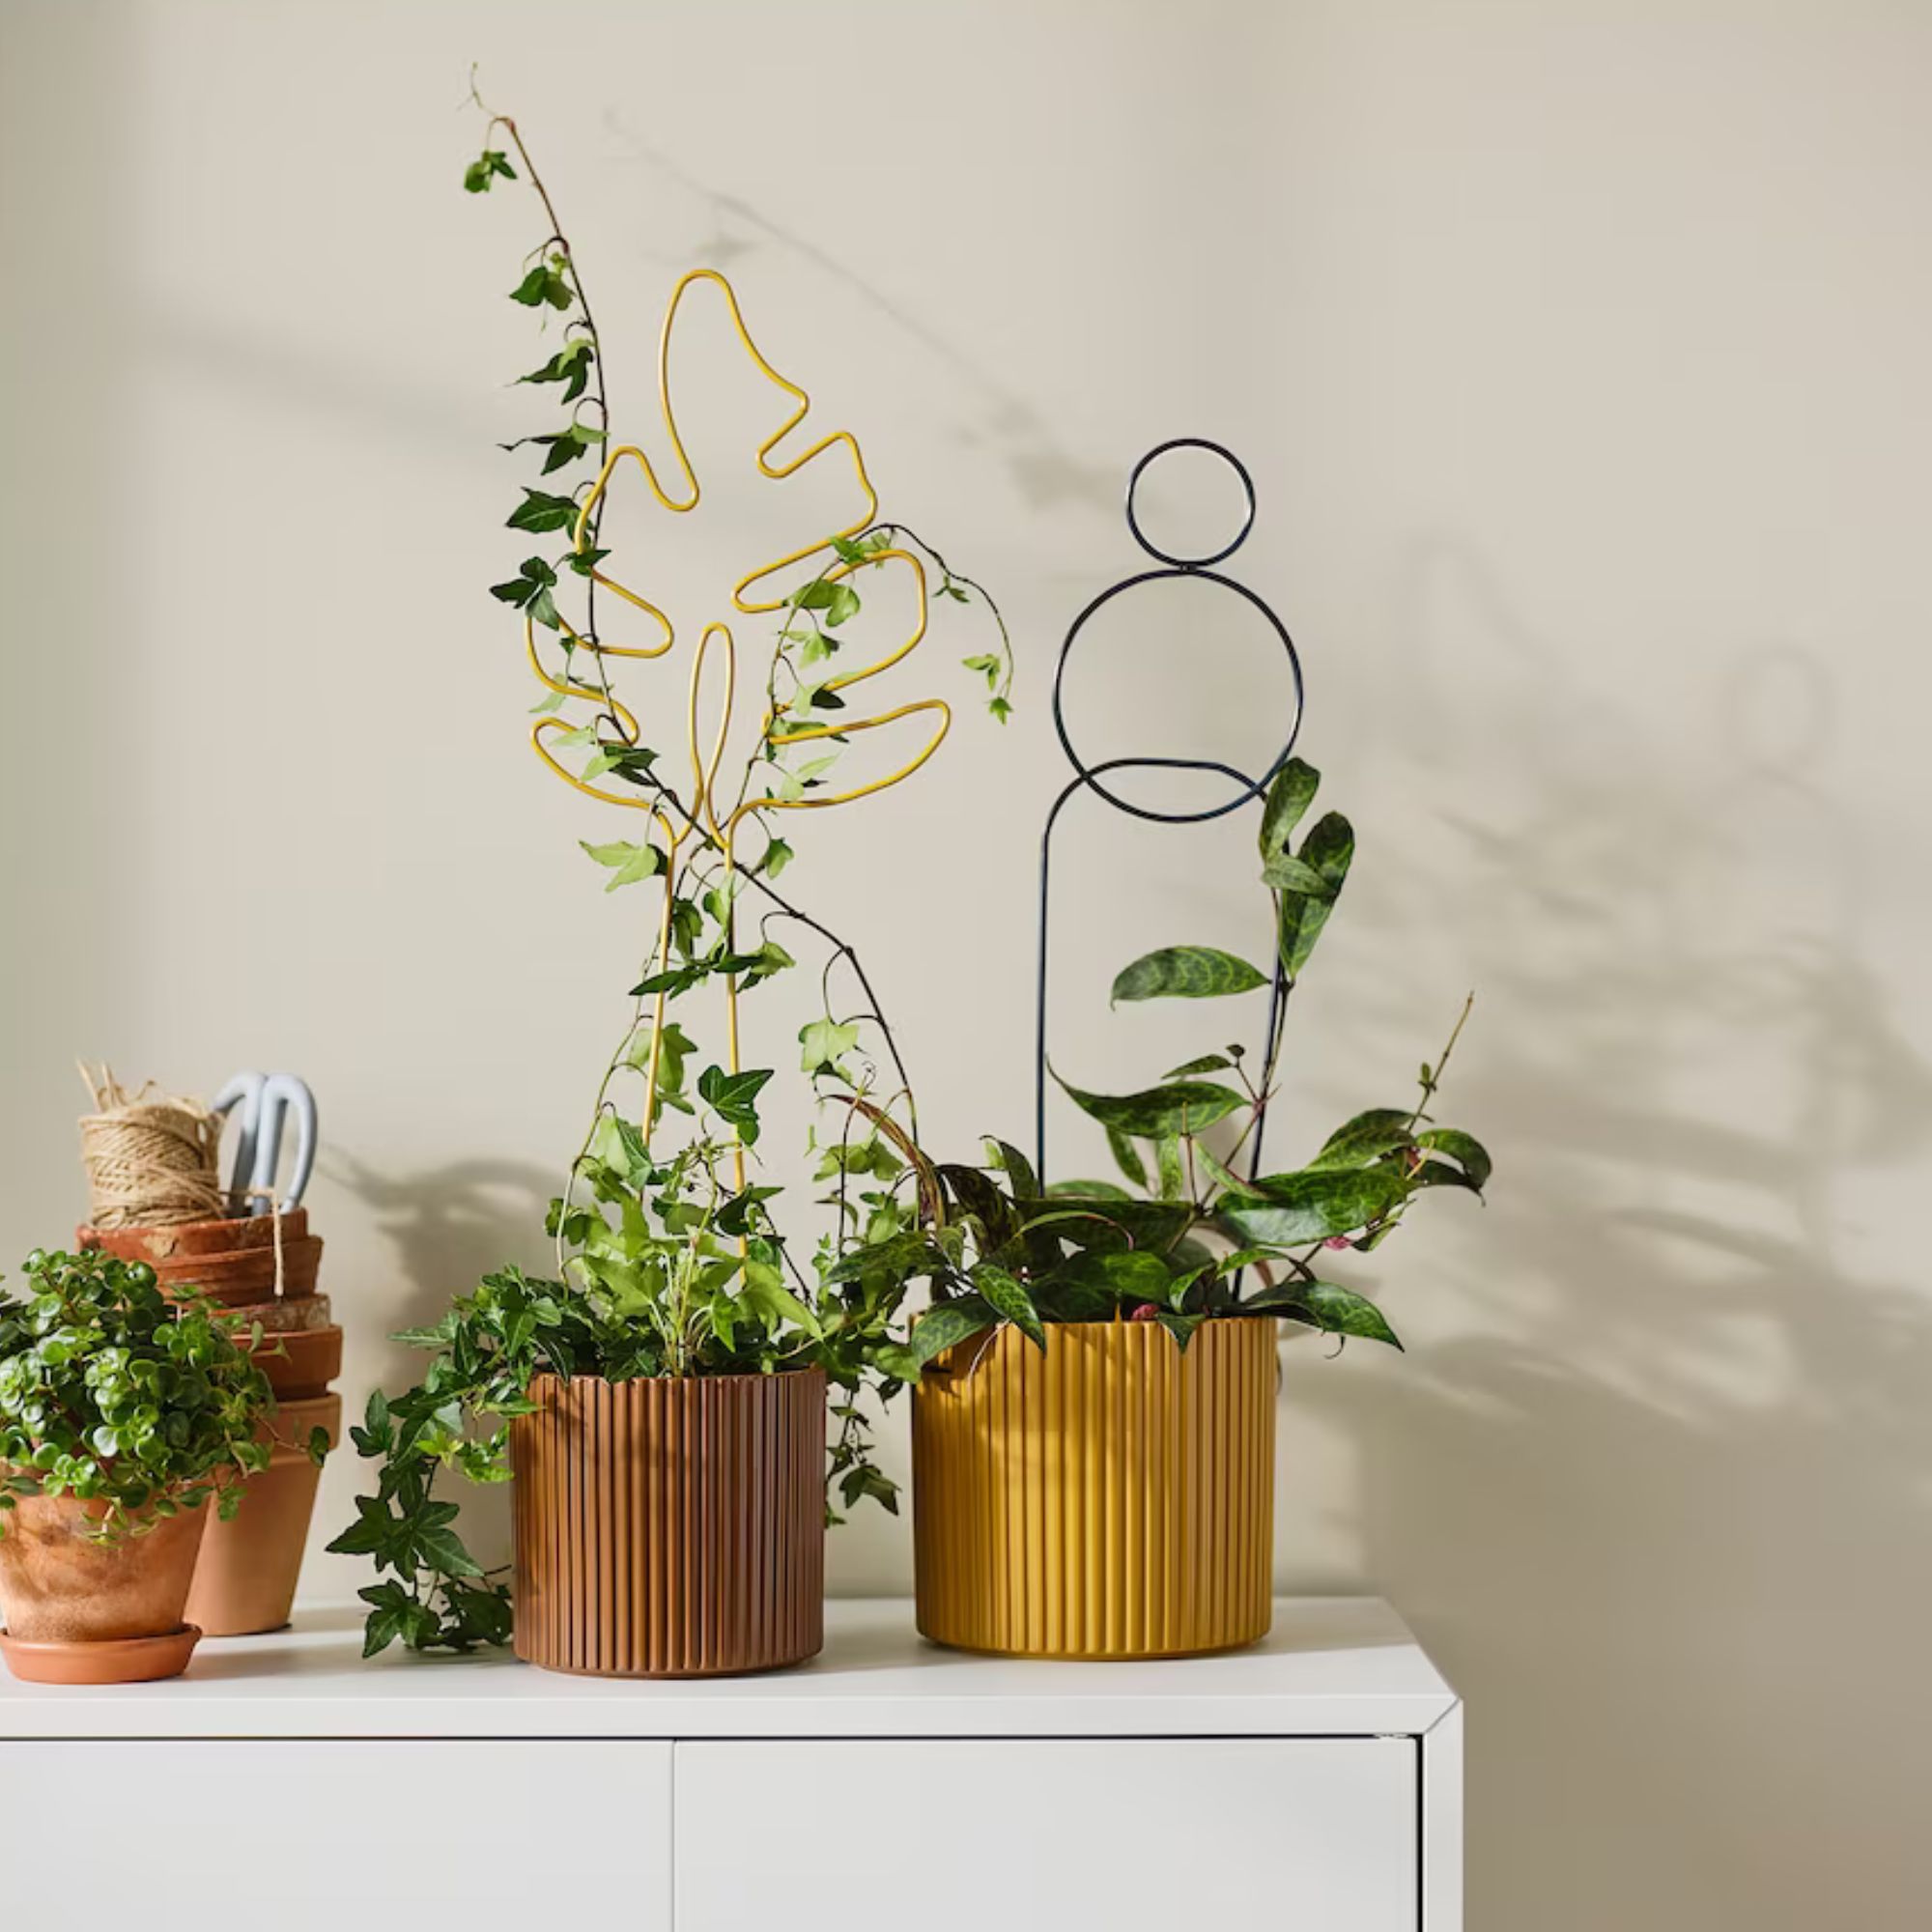 IKEA plant support planter for seeds australia